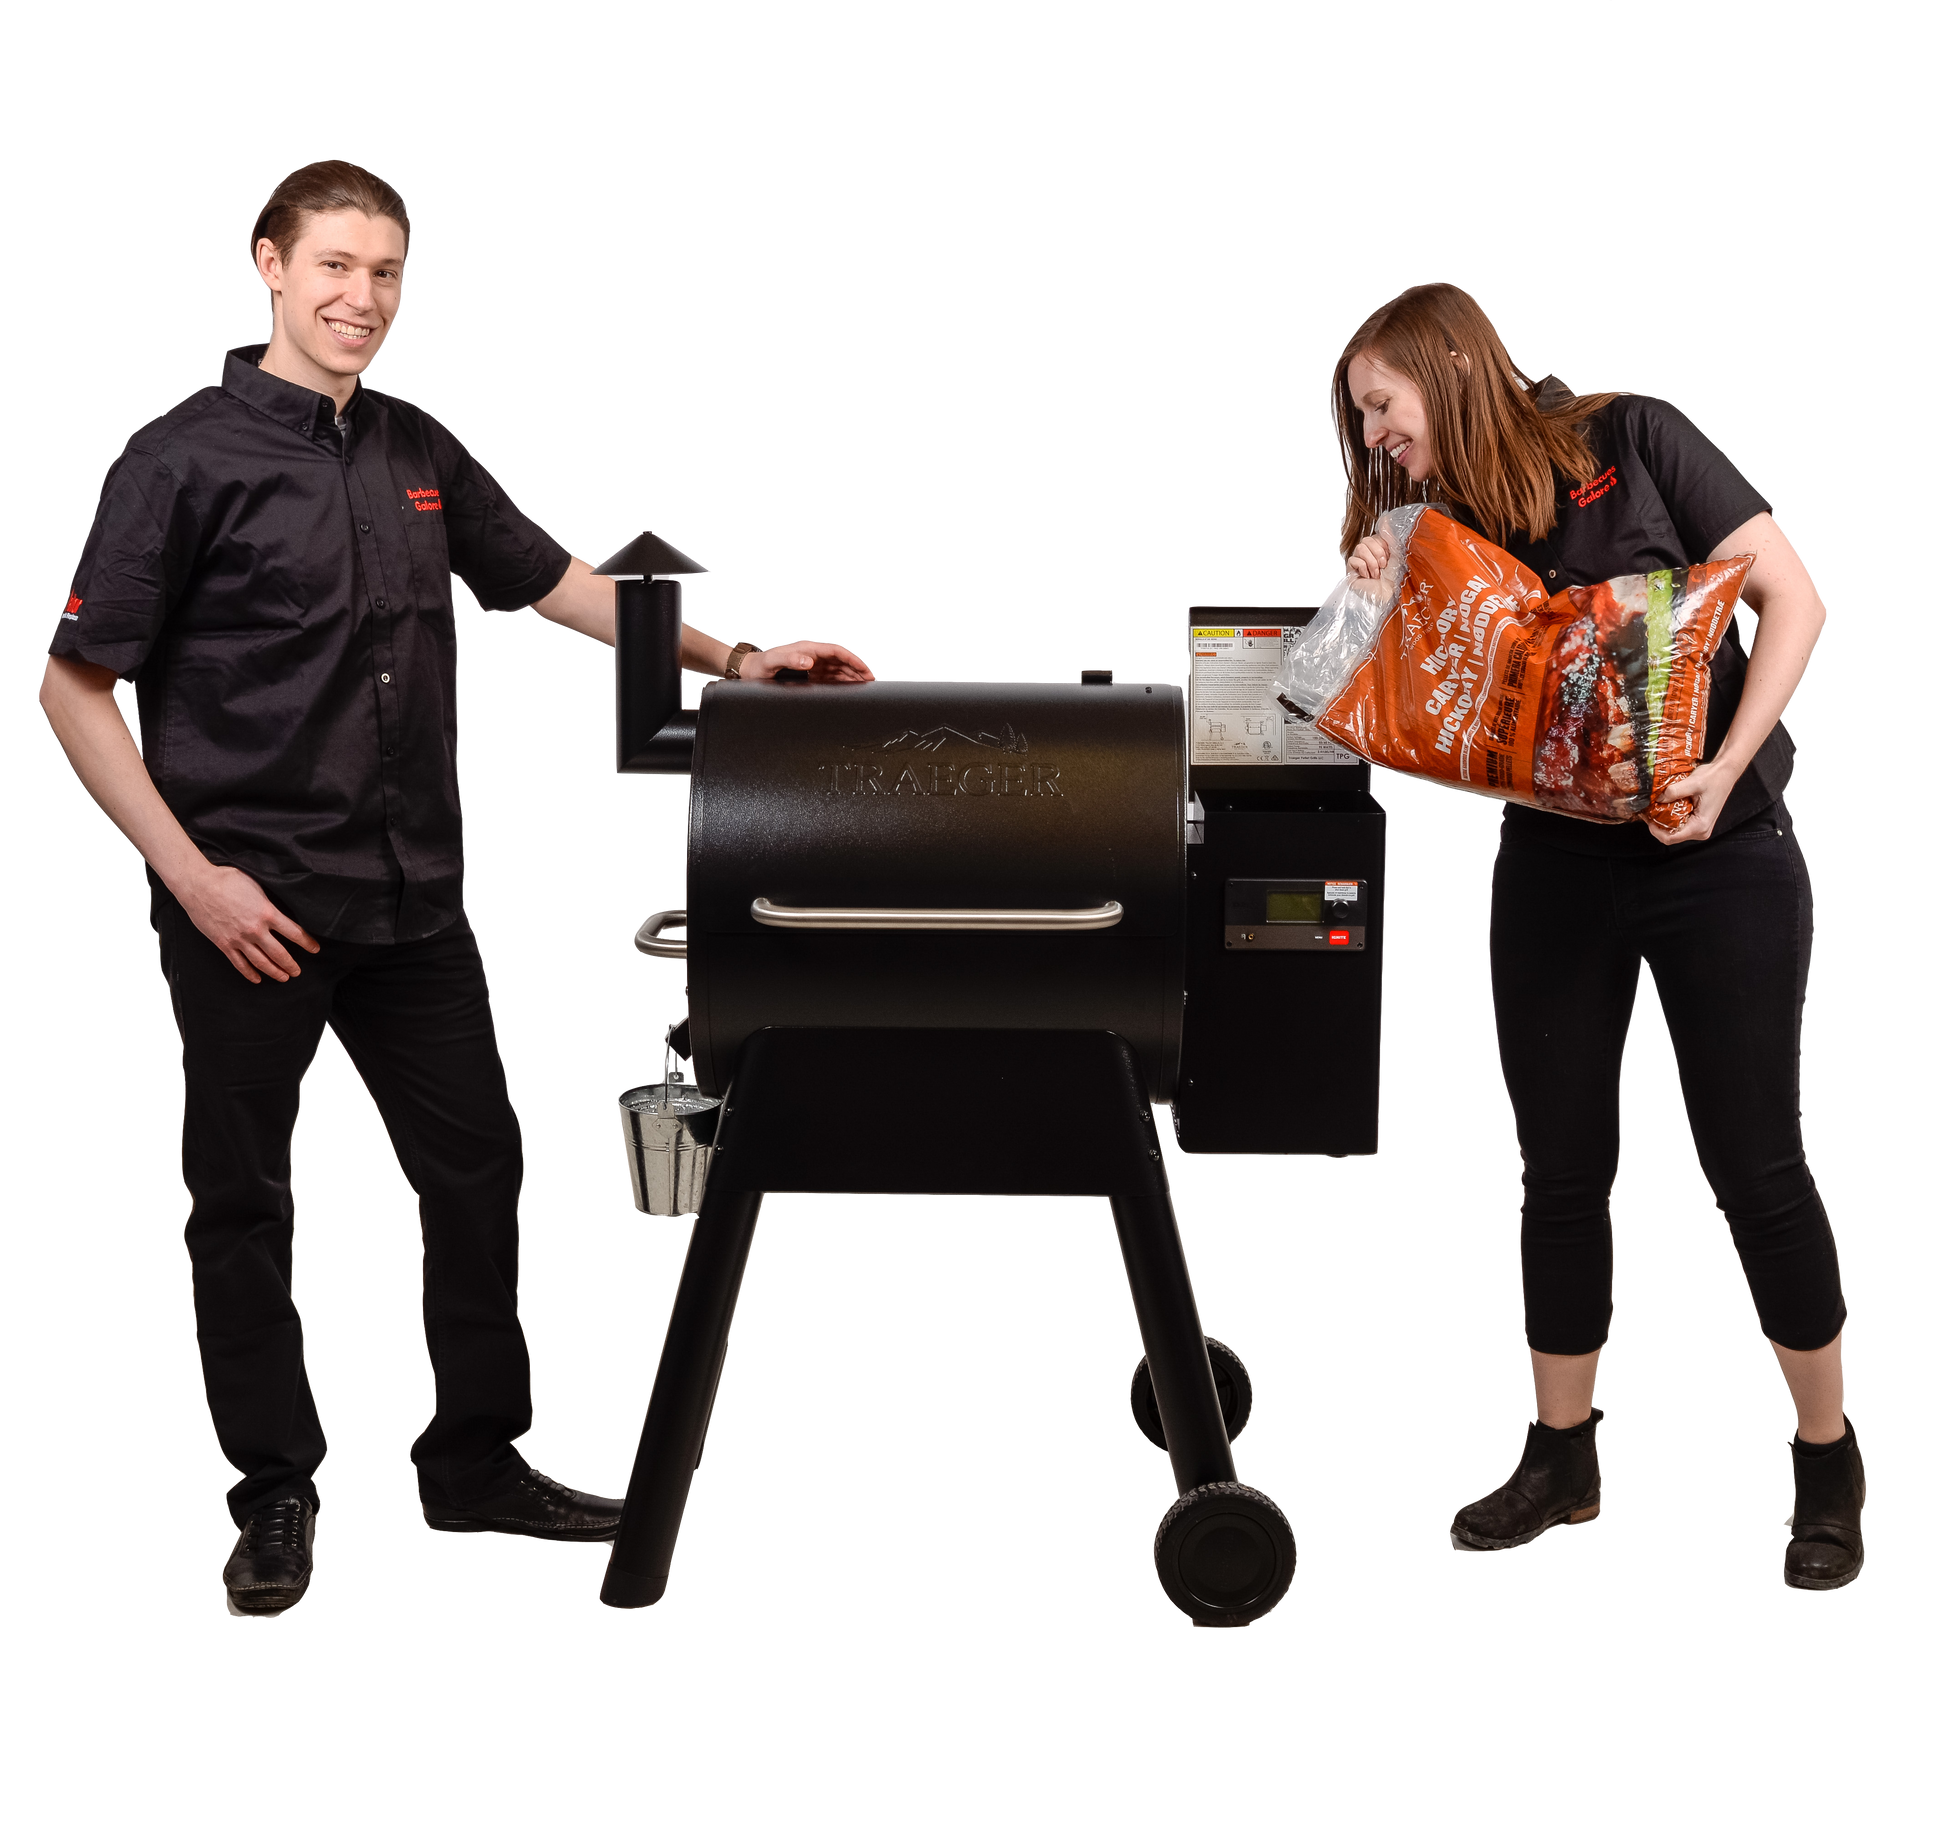 Traeger Pro Series 575 Pellet Grill | A pellet bbq will seriously up your grilling game this summer | Barbecues Galore: Burlington, Etobicoke, Oakville & Calgary